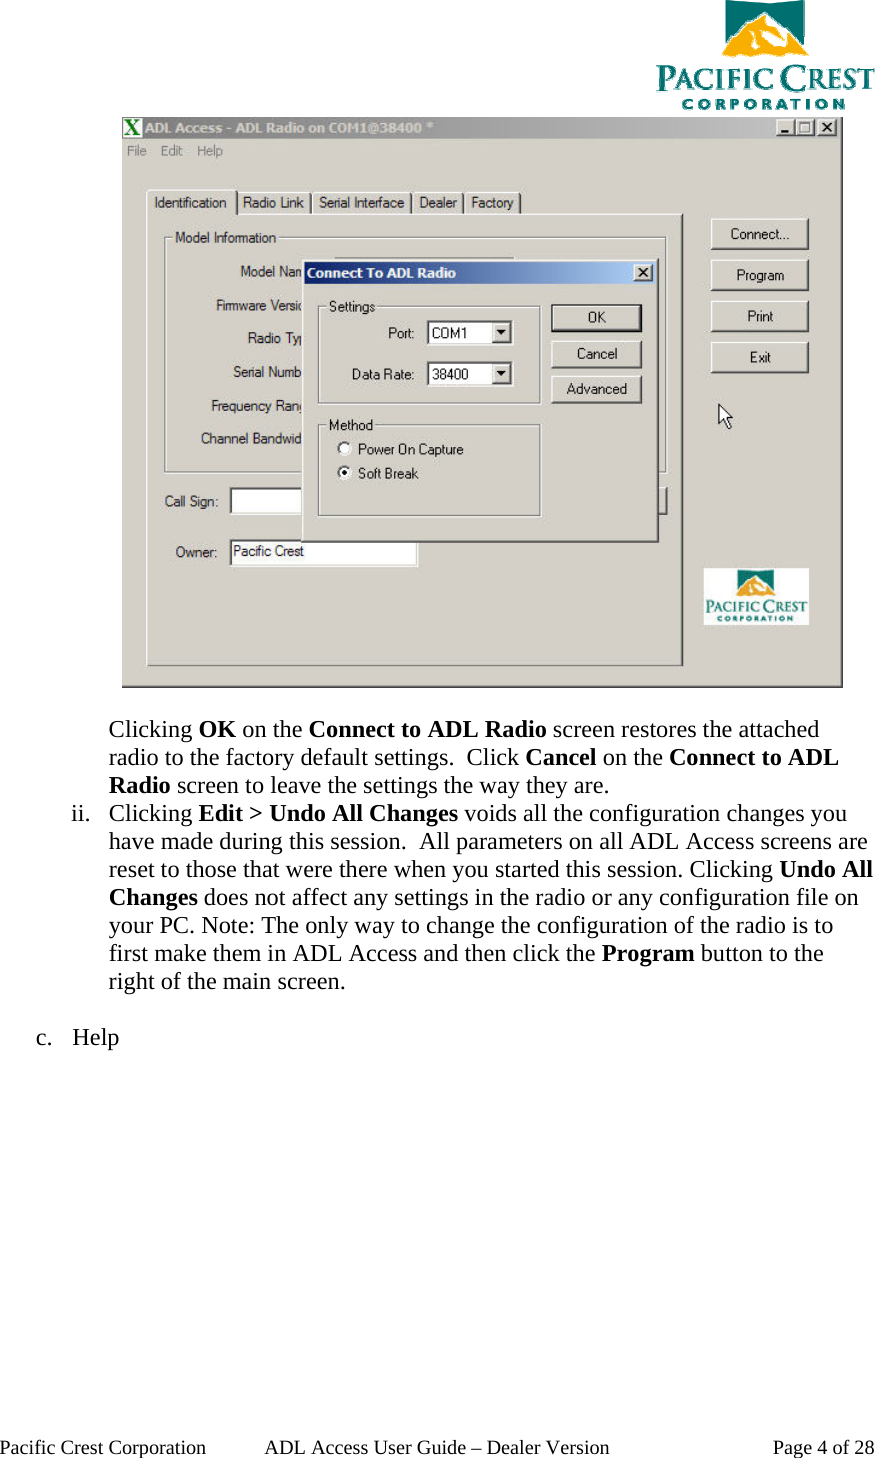  Pacific Crest Corporation  ADL Access User Guide – Dealer Version  Page 4 of 28   Clicking OK on the Connect to ADL Radio screen restores the attached radio to the factory default settings.  Click Cancel on the Connect to ADL Radio screen to leave the settings the way they are. ii. Clicking Edit &gt; Undo All Changes voids all the configuration changes you have made during this session.  All parameters on all ADL Access screens are reset to those that were there when you started this session. Clicking Undo All Changes does not affect any settings in the radio or any configuration file on your PC. Note: The only way to change the configuration of the radio is to first make them in ADL Access and then click the Program button to the right of the main screen.    c. Help 